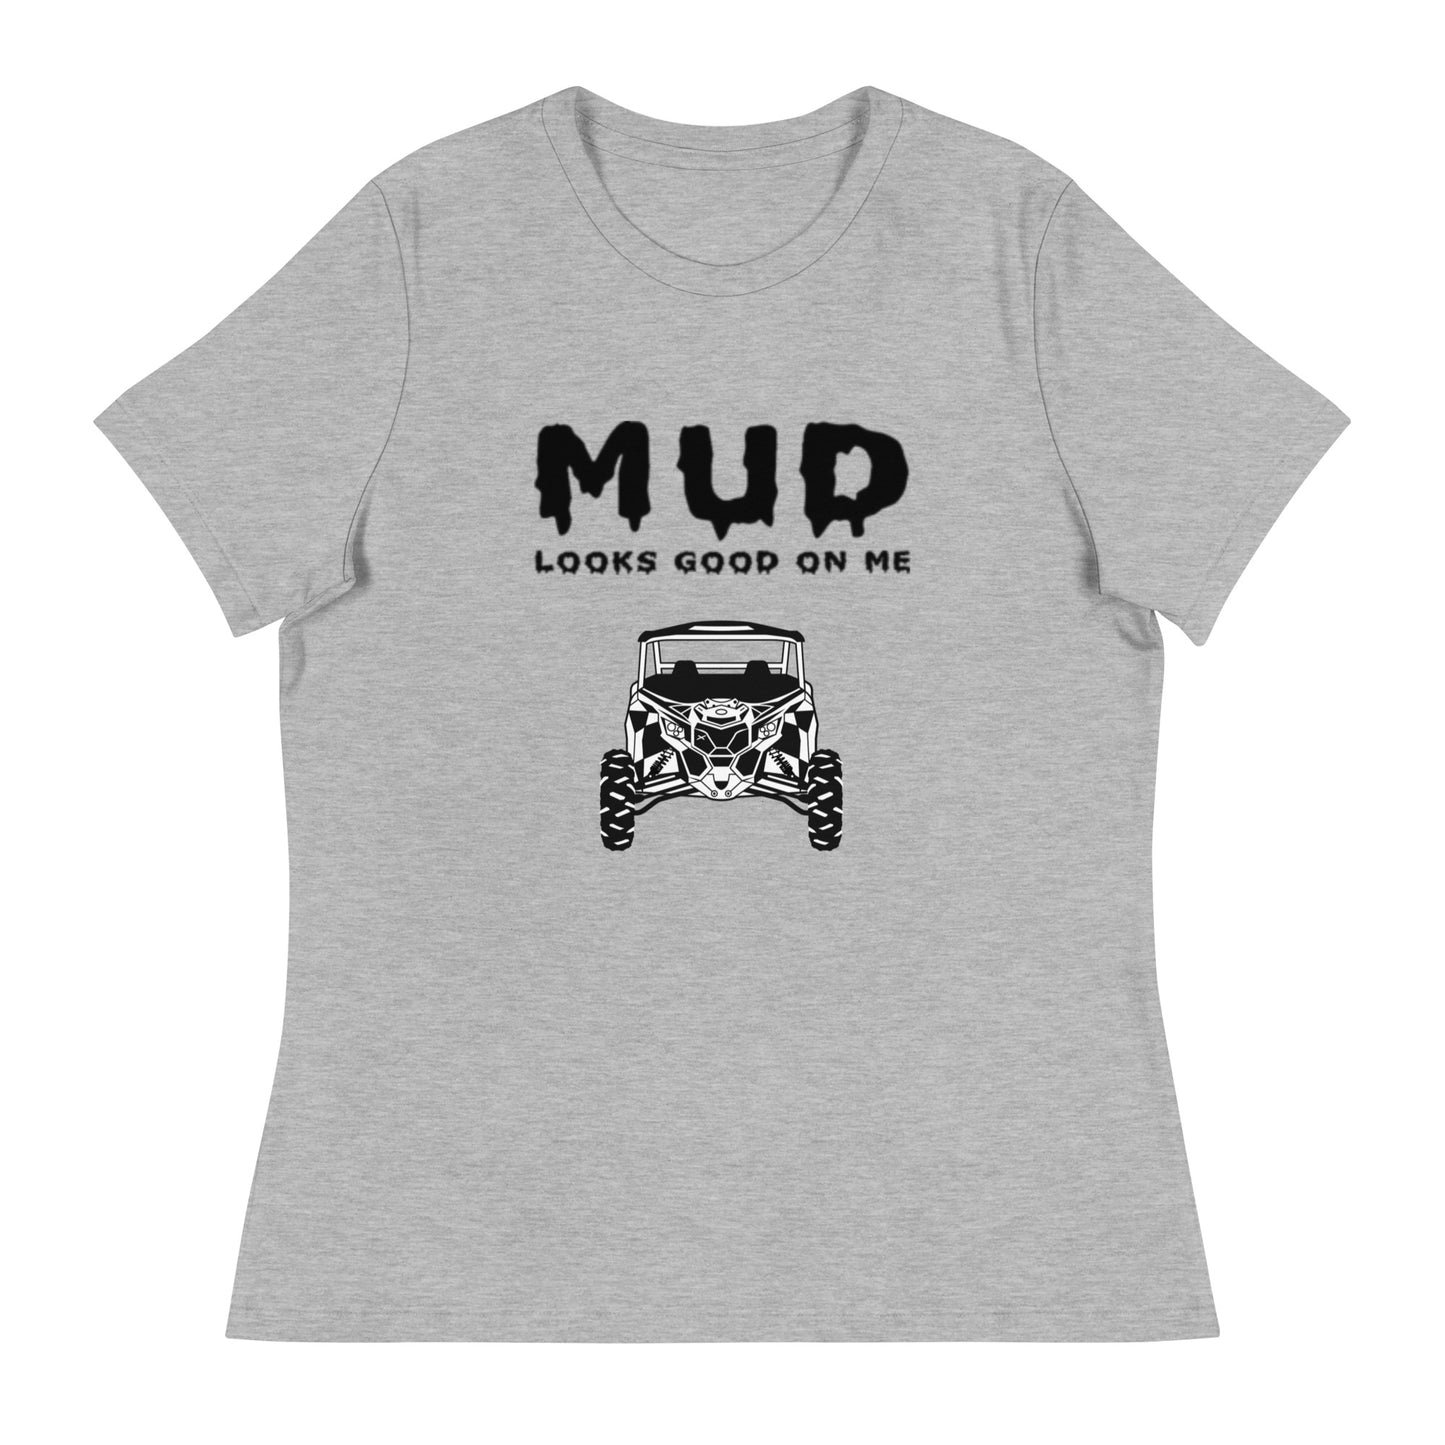 MUD looks good on me - Women's relaxed tee